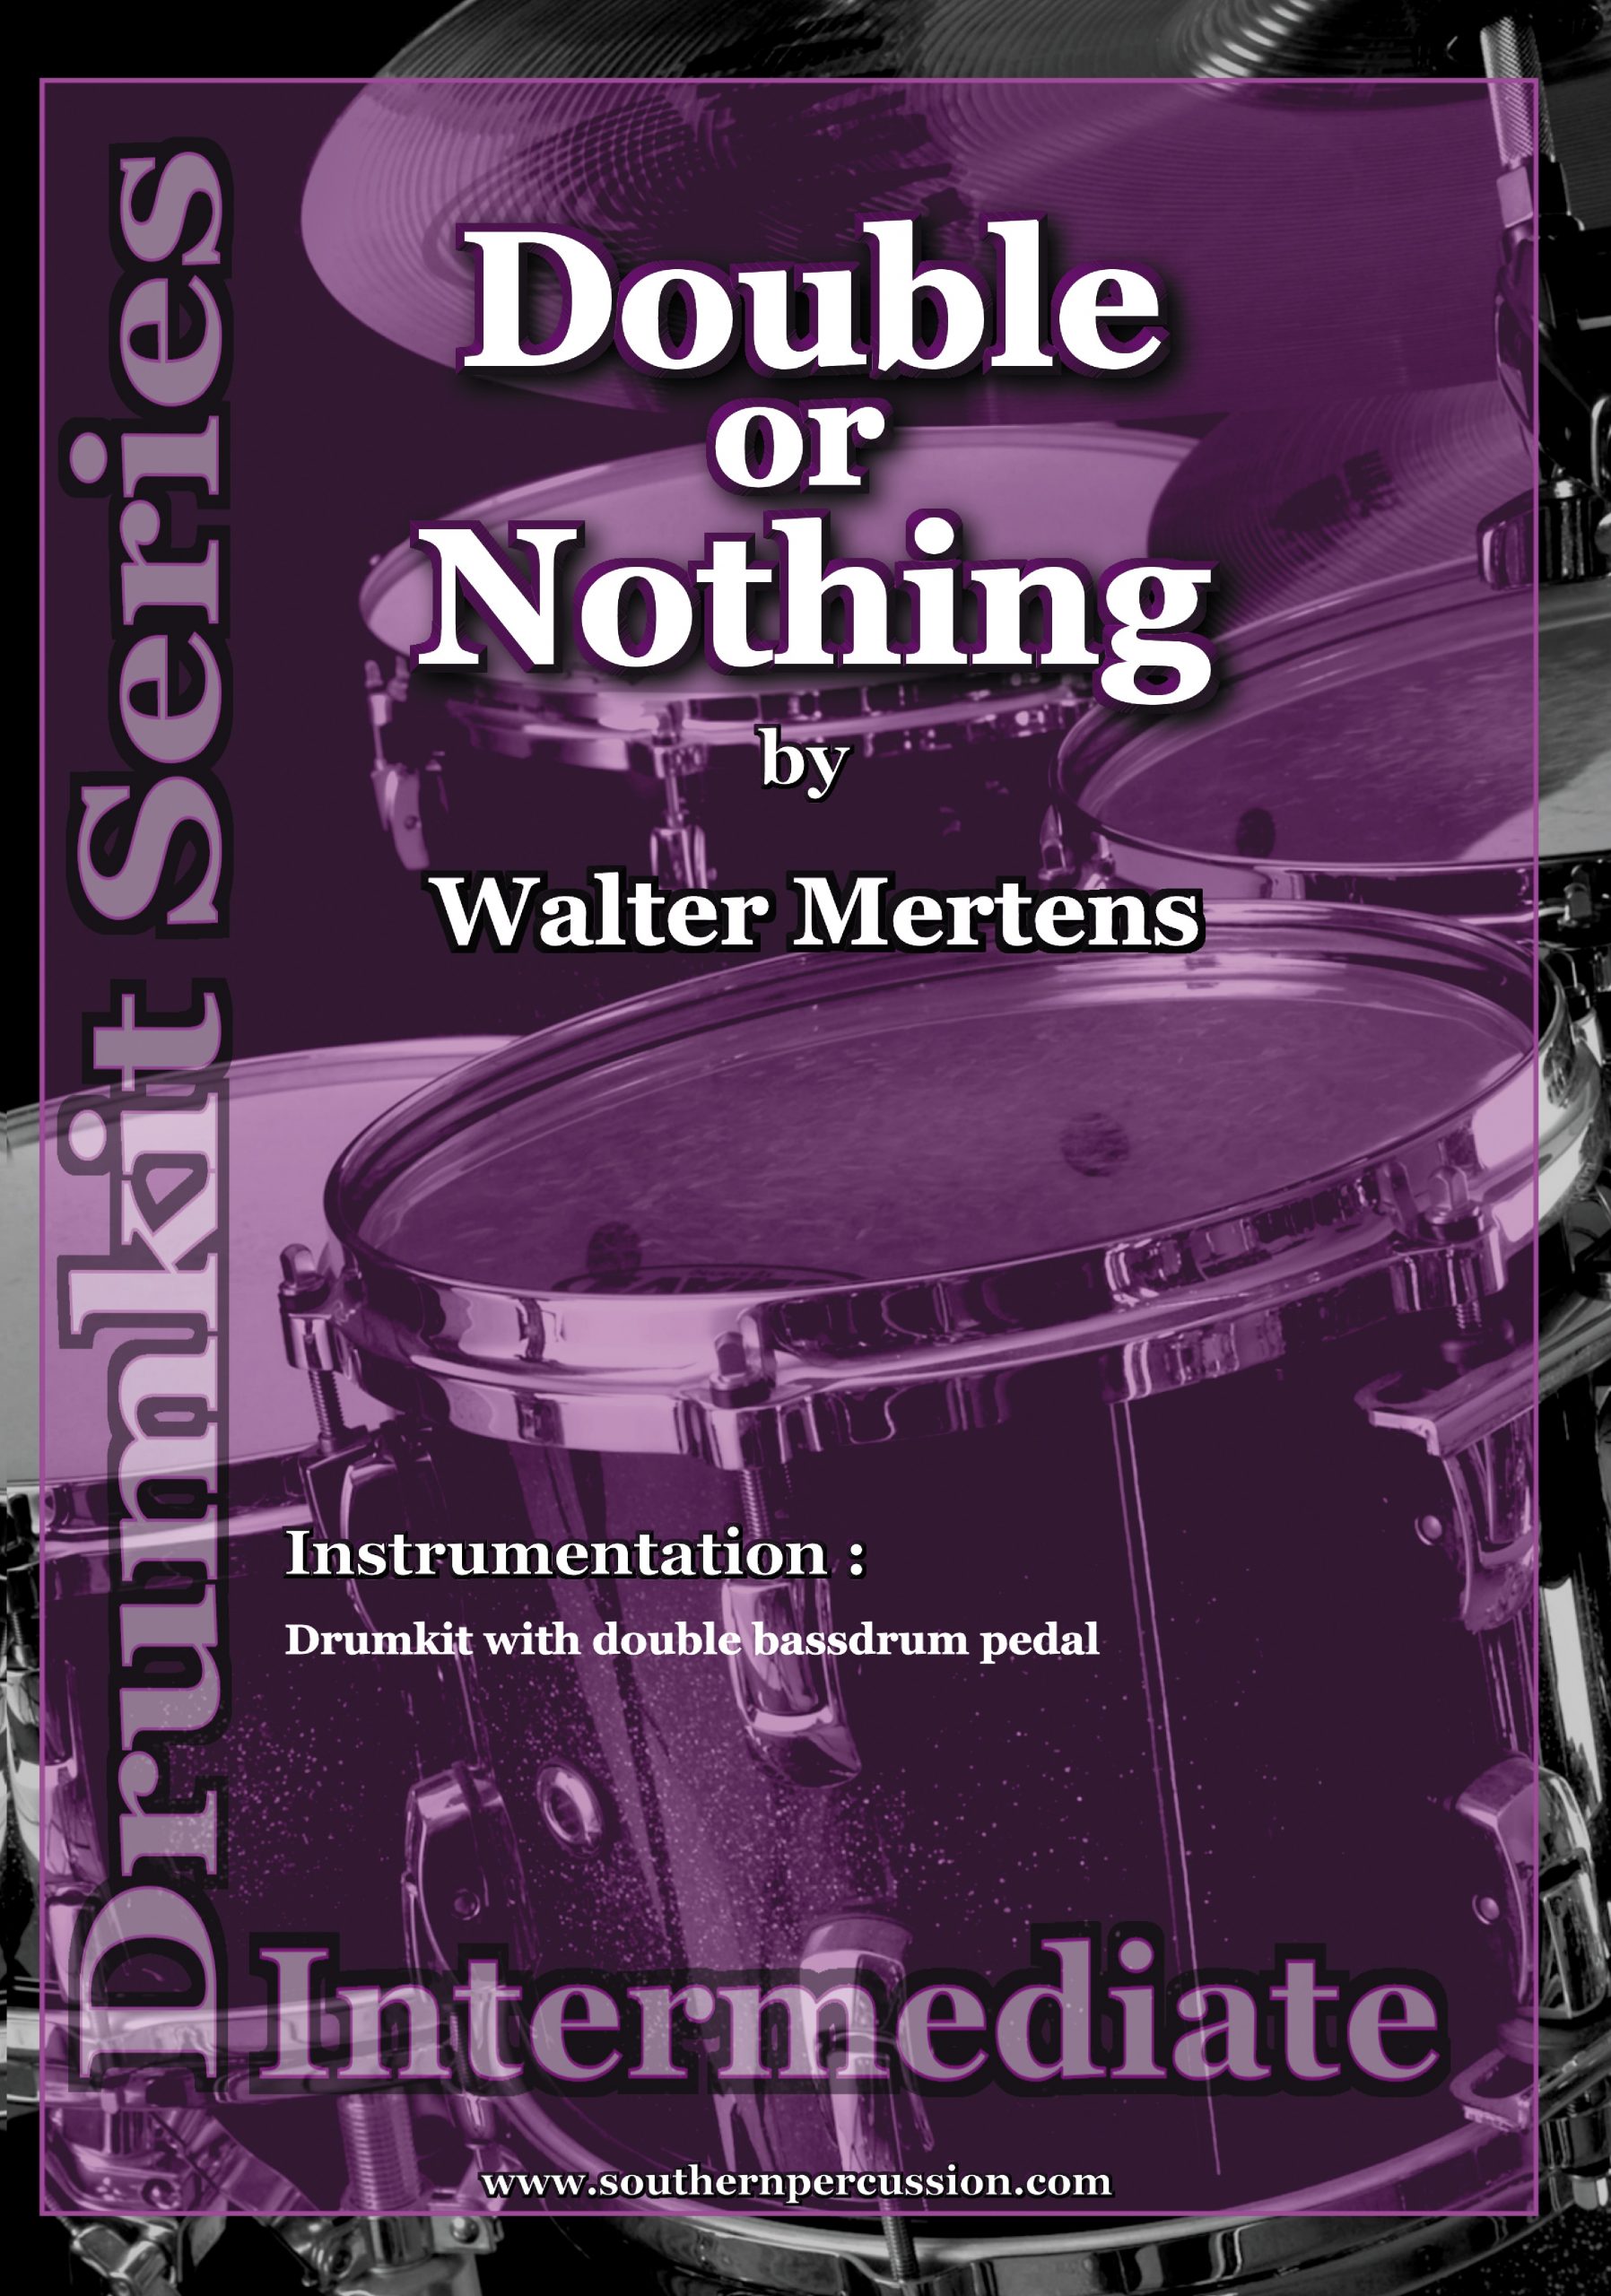 Double or Nothing by Walter Mertens